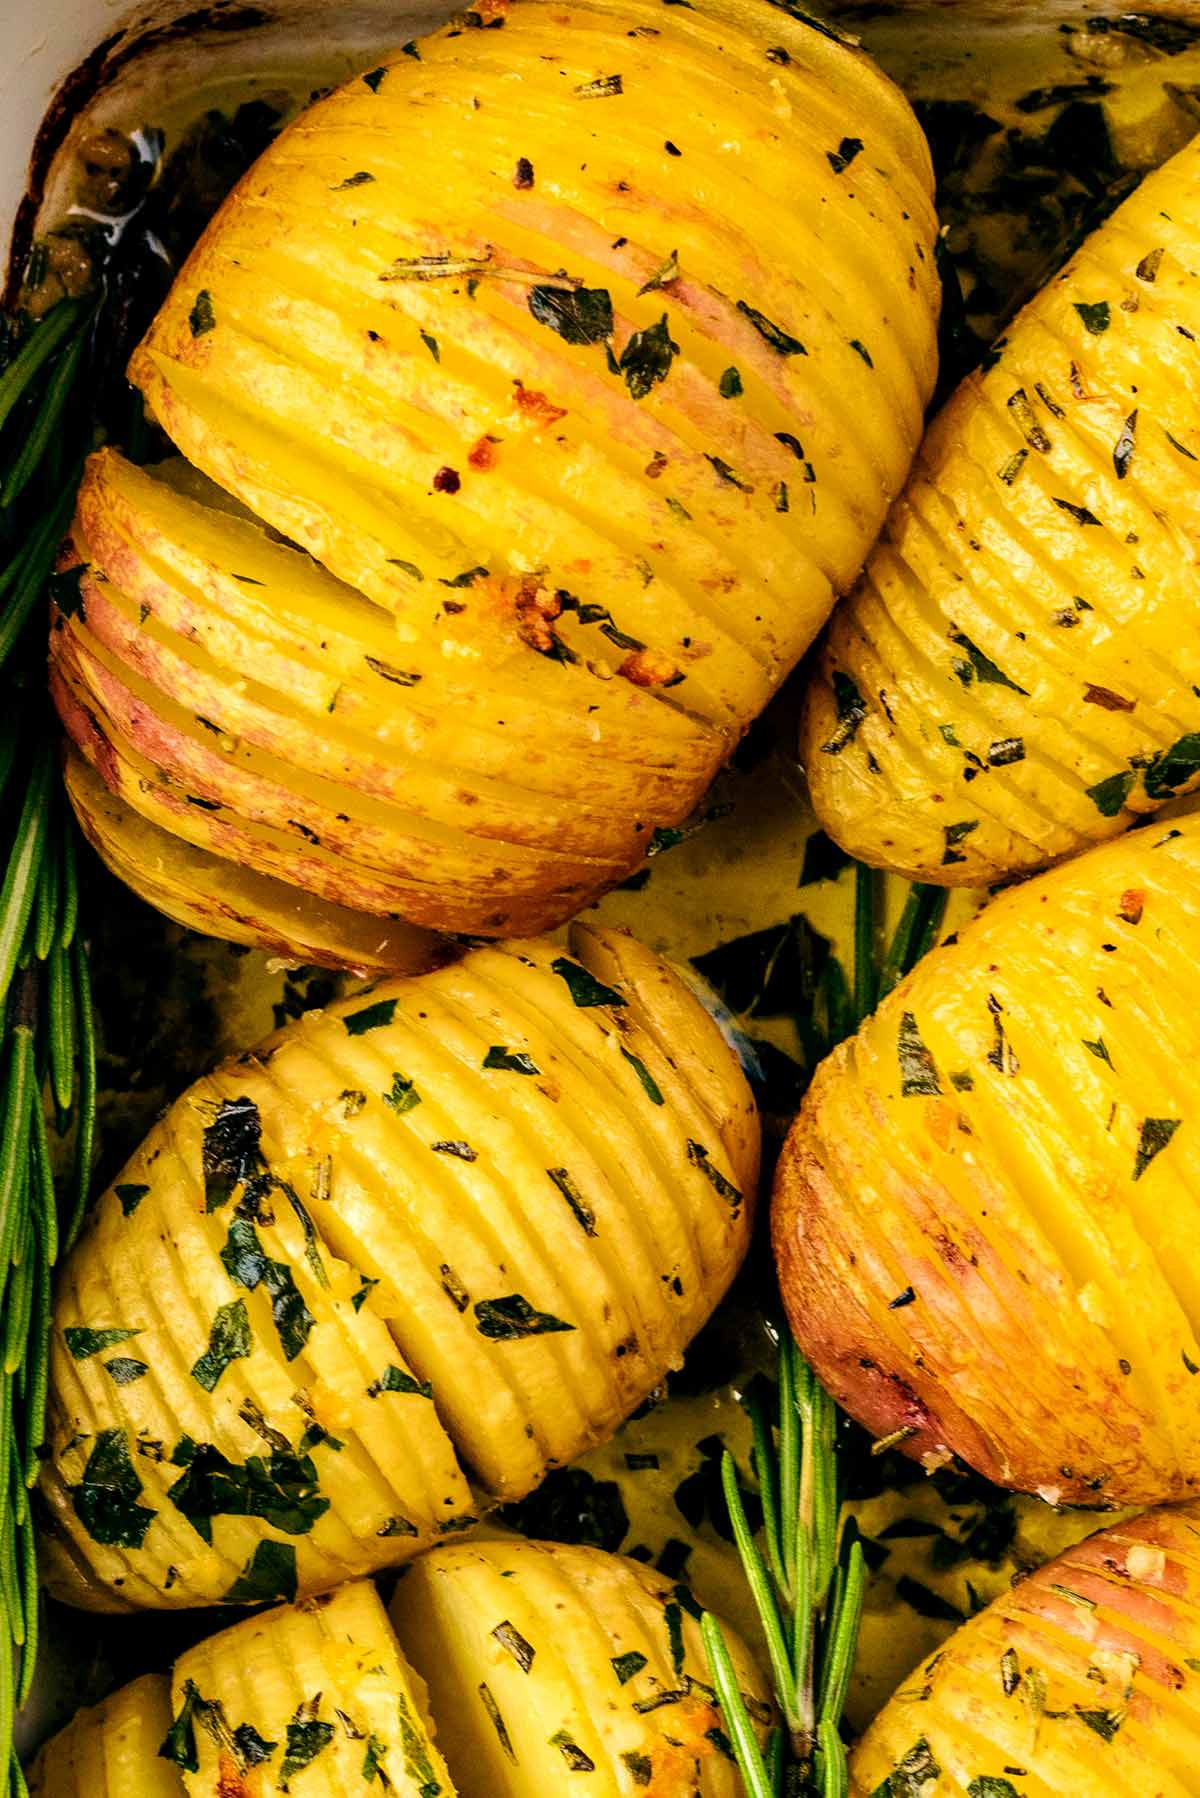 Cooked hasselback potatoes topped with chopped herbs.